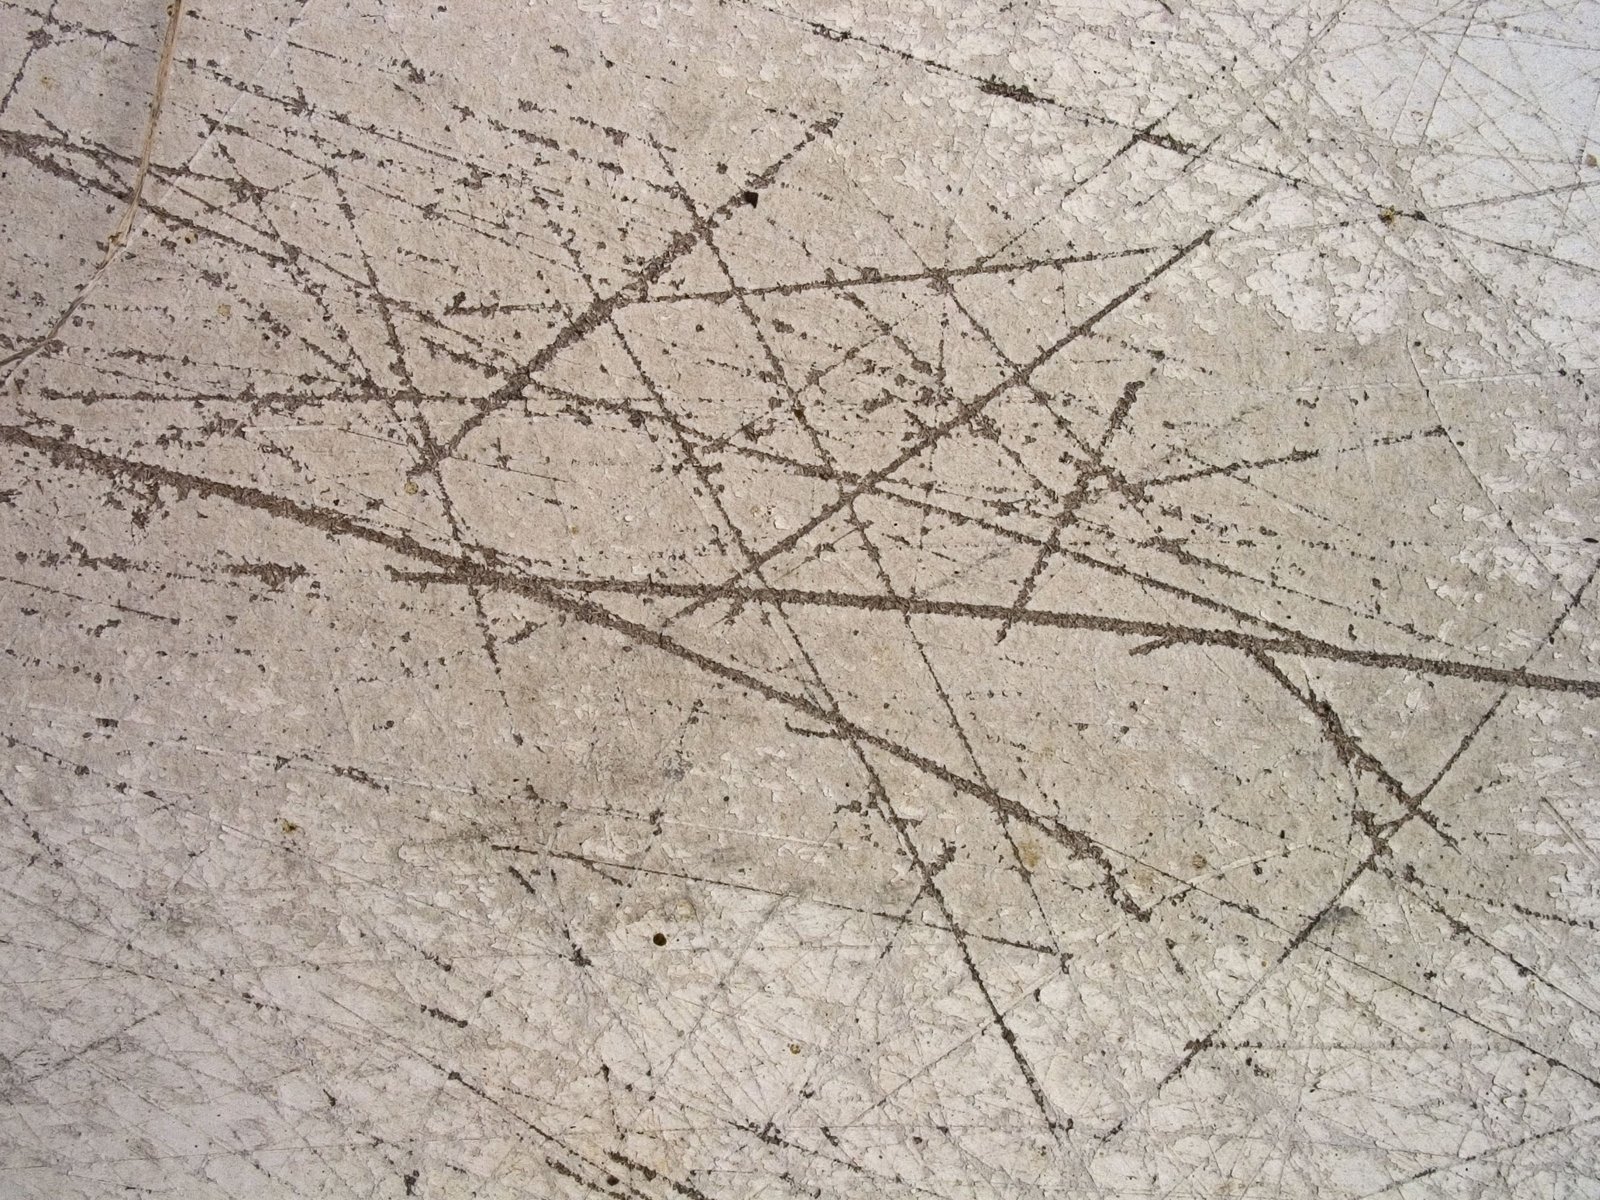 the textured pattern of s and lines on concrete